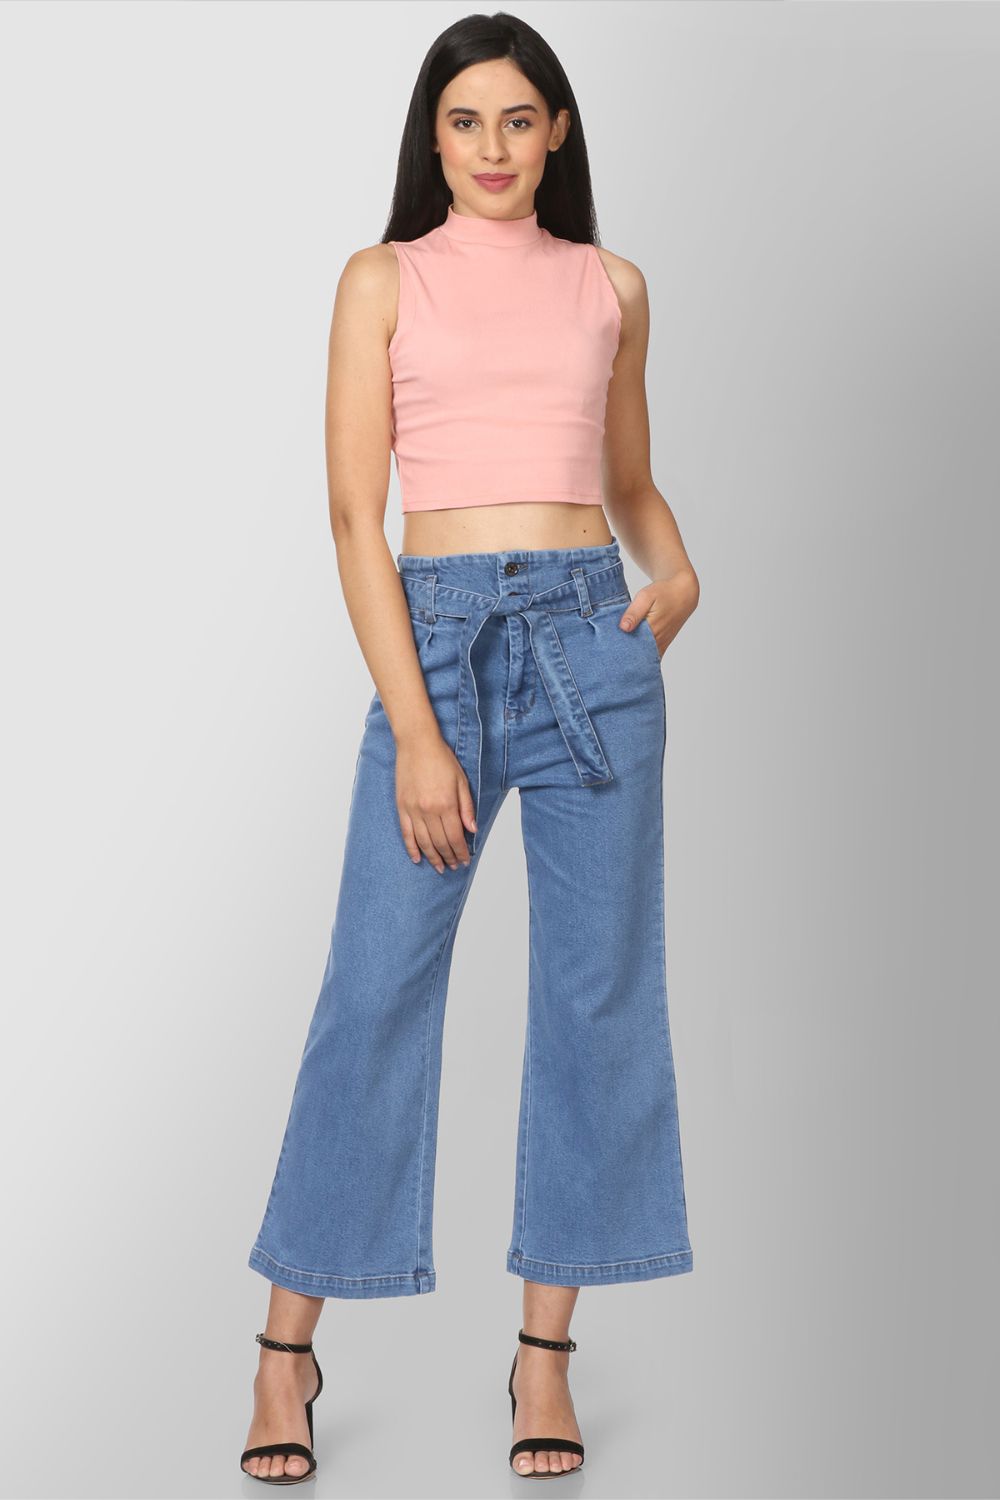 2022 Summer Fashion Womens Square Neck Crop Top And High Waist Parallel  Pants Set Short Sleeve, Solid Color, Korean Style Outfit From Xisibeauty,  $27.34 | DHgate.Com